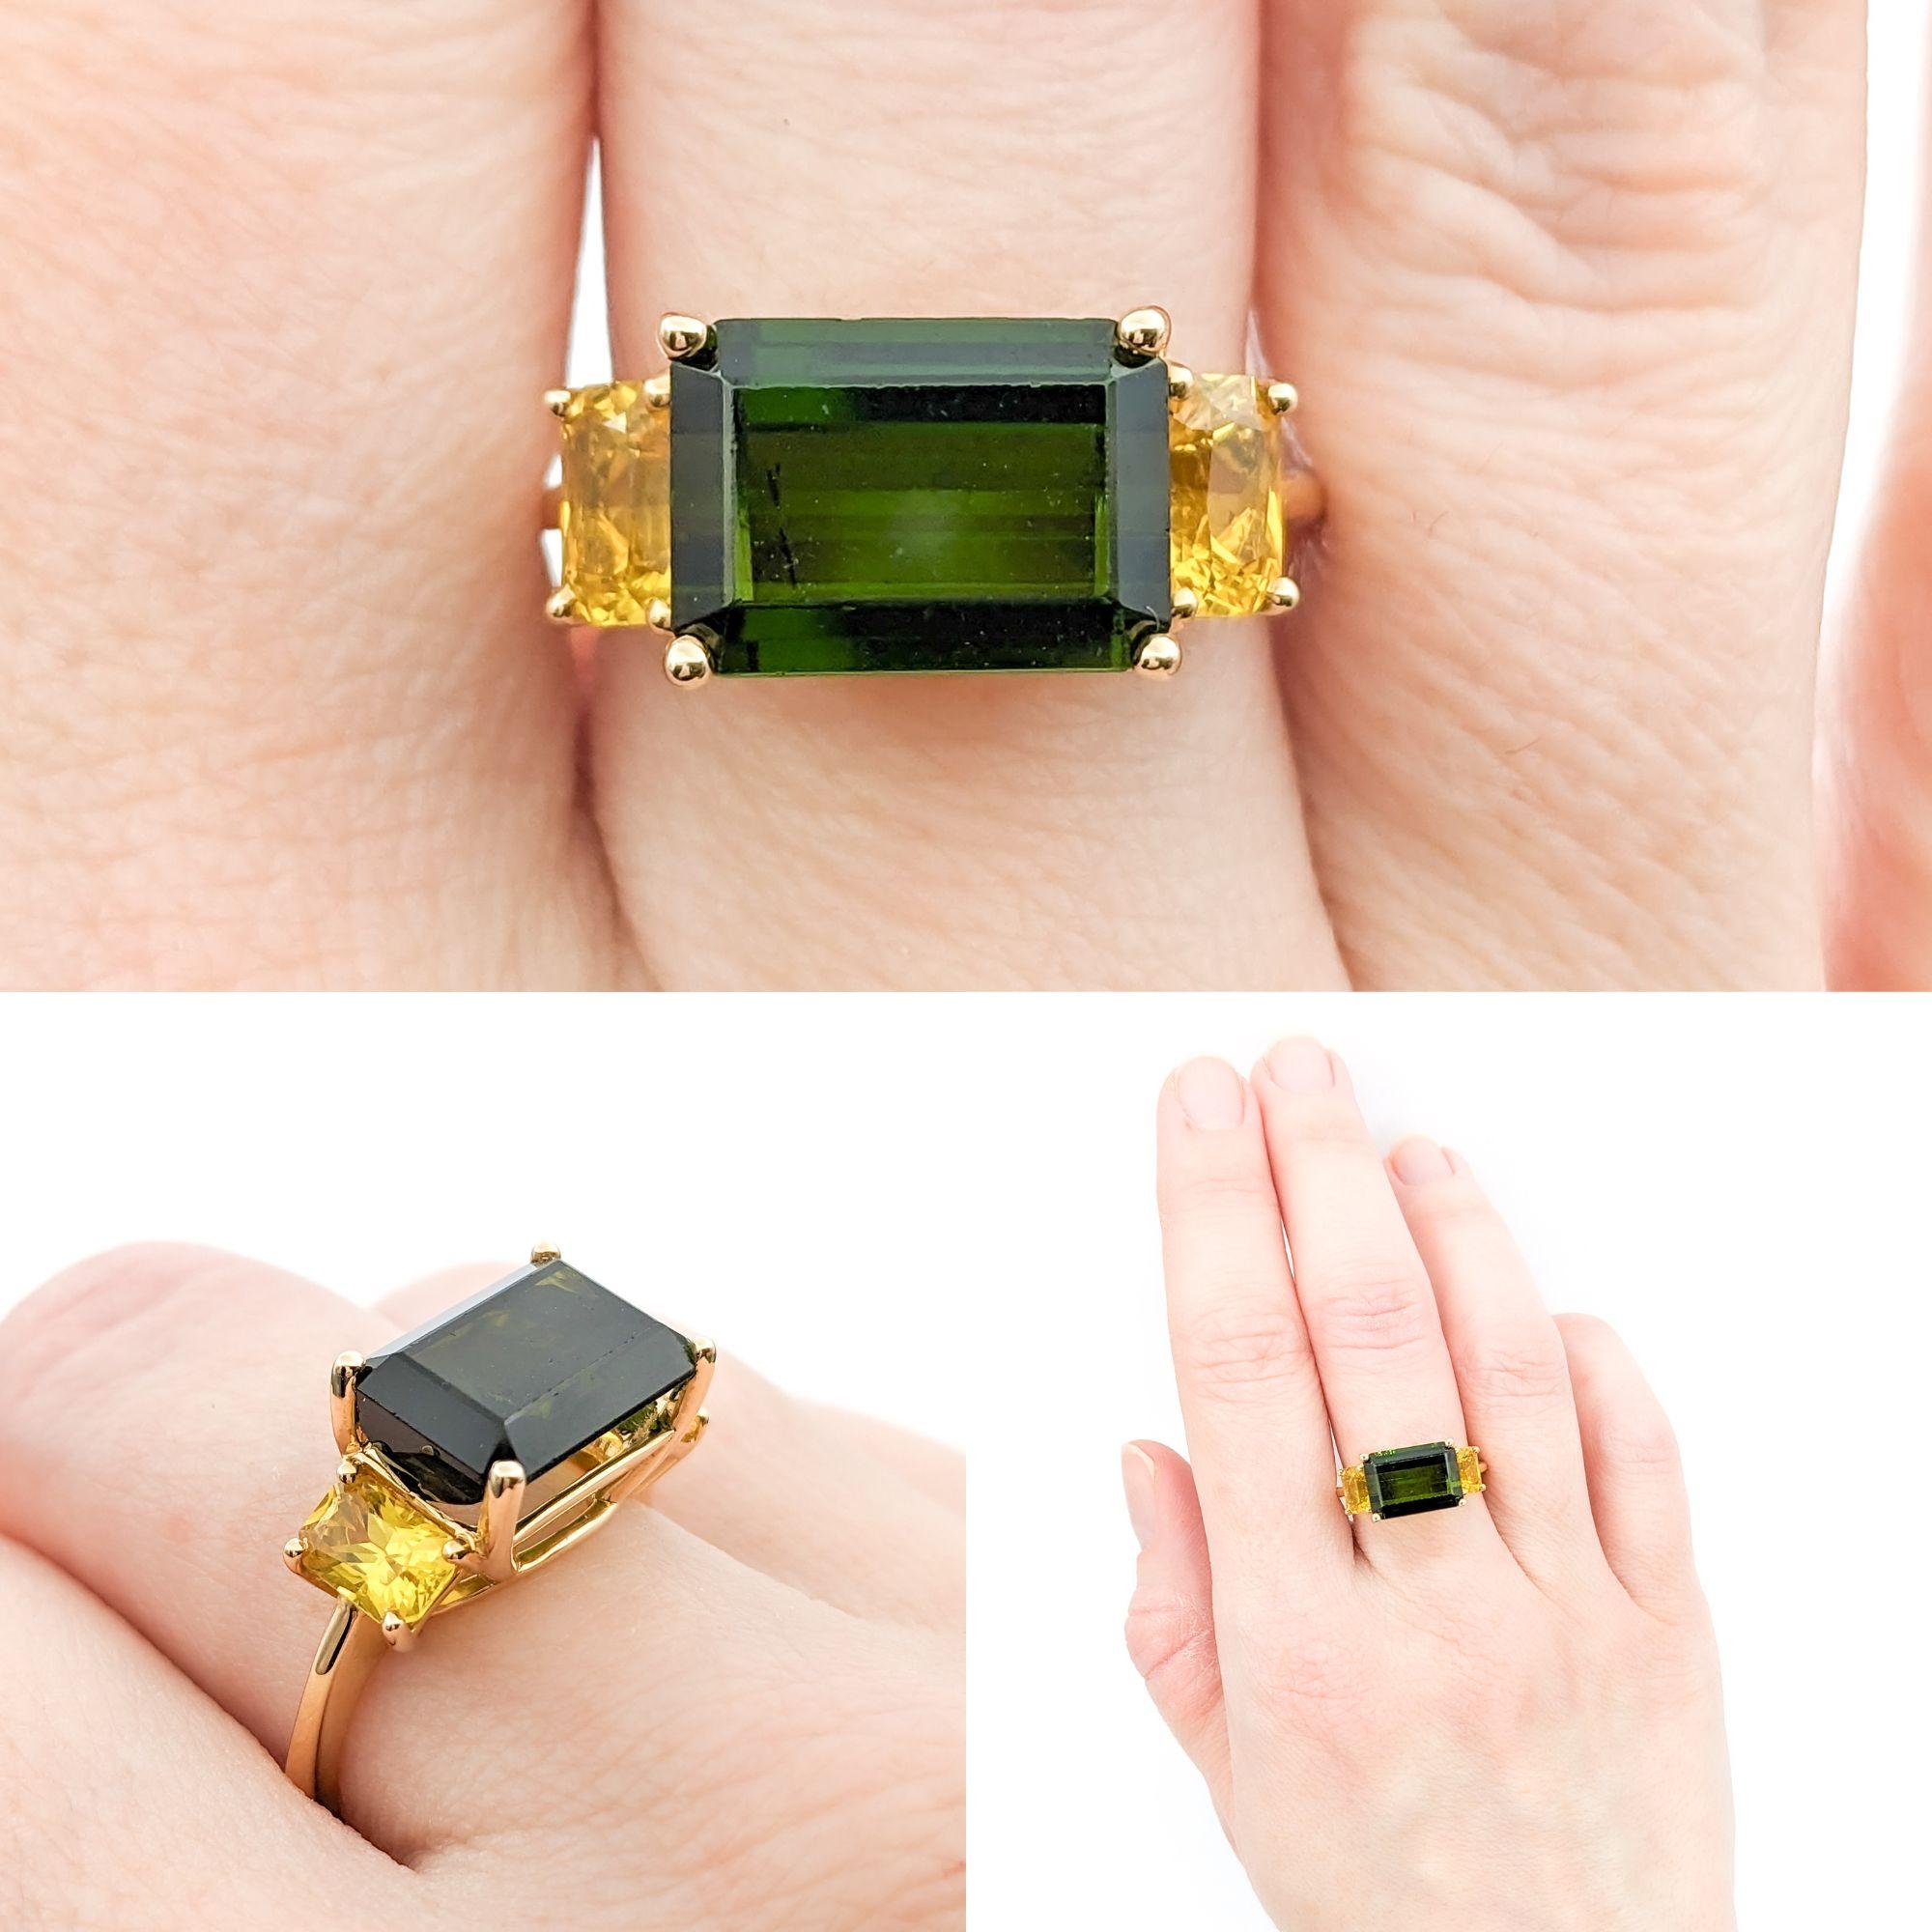 4.17ct Green Tourmaline & 1.44ctw Yellow Sapphires Ring In Yellow Gold

This exquisite ring, fashioned from 14kt yellow gold, showcases a magnificent 4.71ct tourmaline as its centerpiece. This gemstone, known for its vibrant color and clarity, is